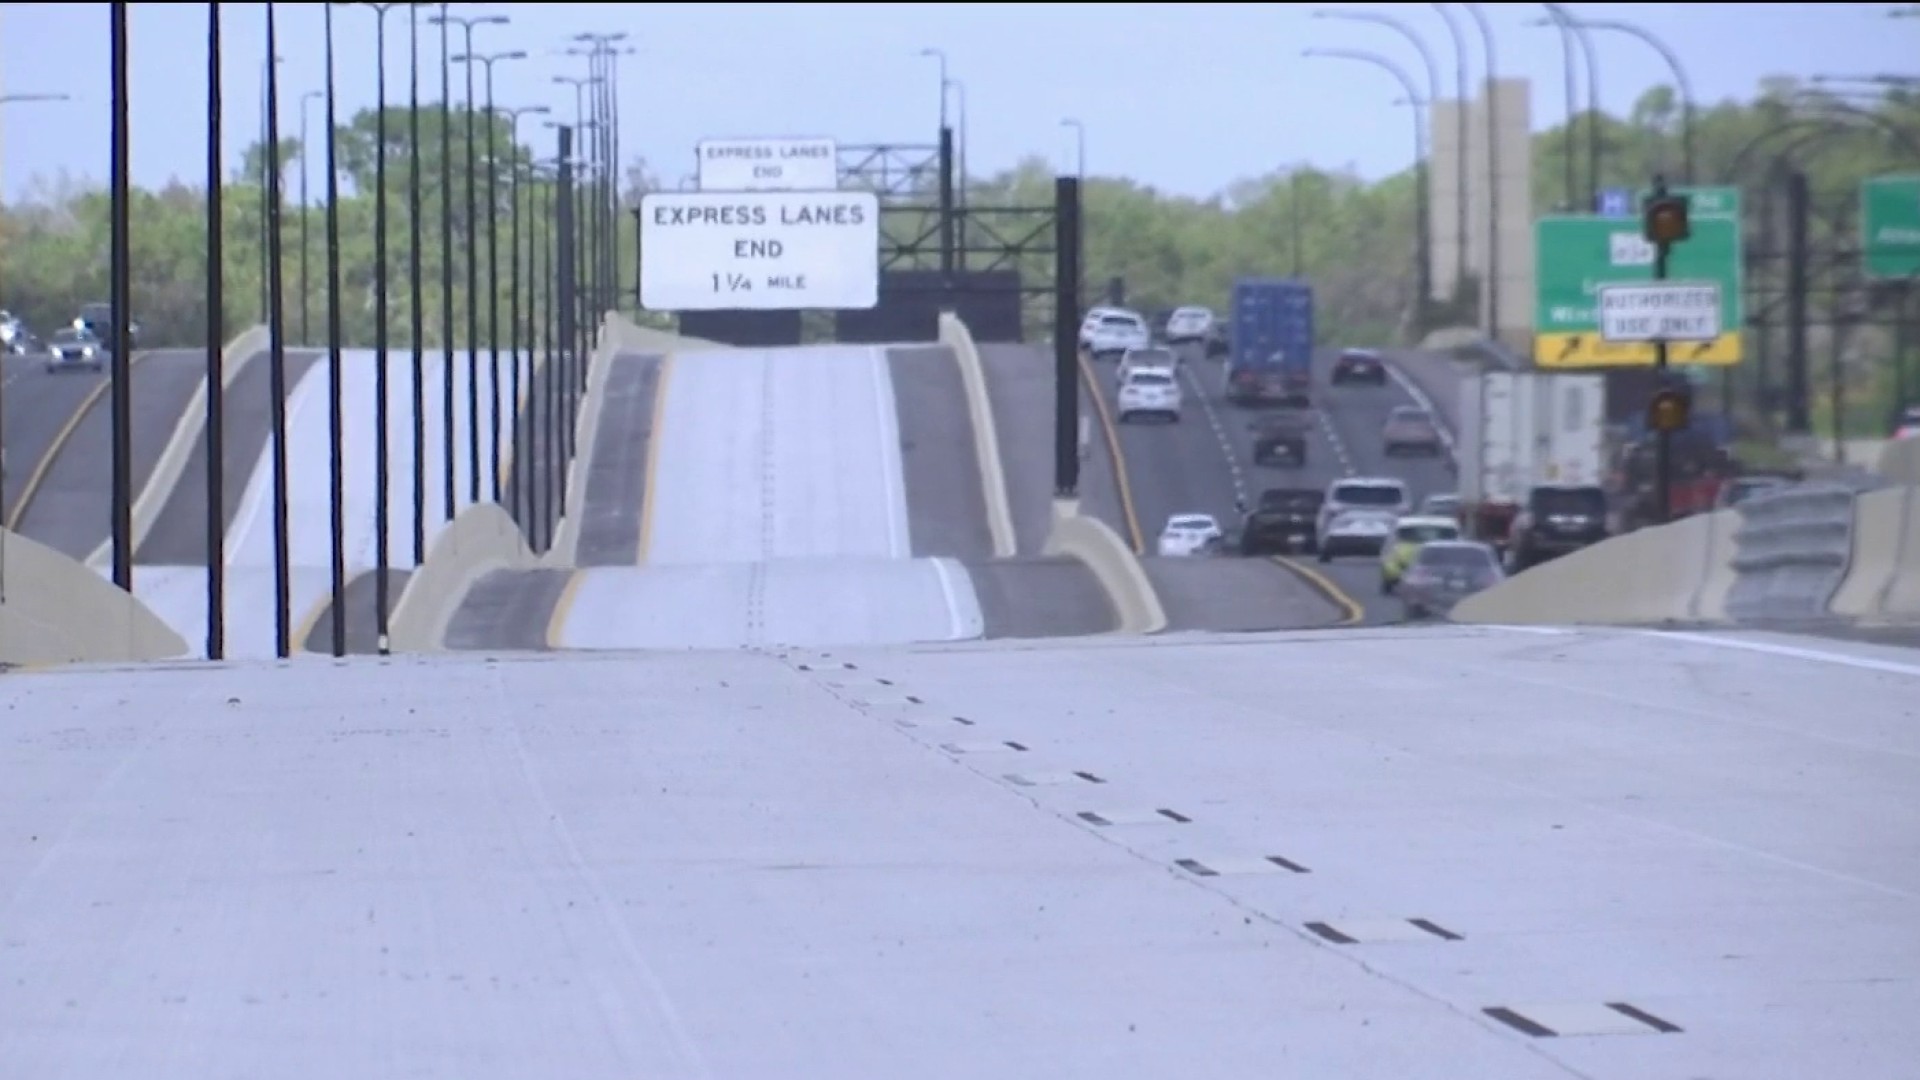 Here's how the new I-4 express toll lanes work